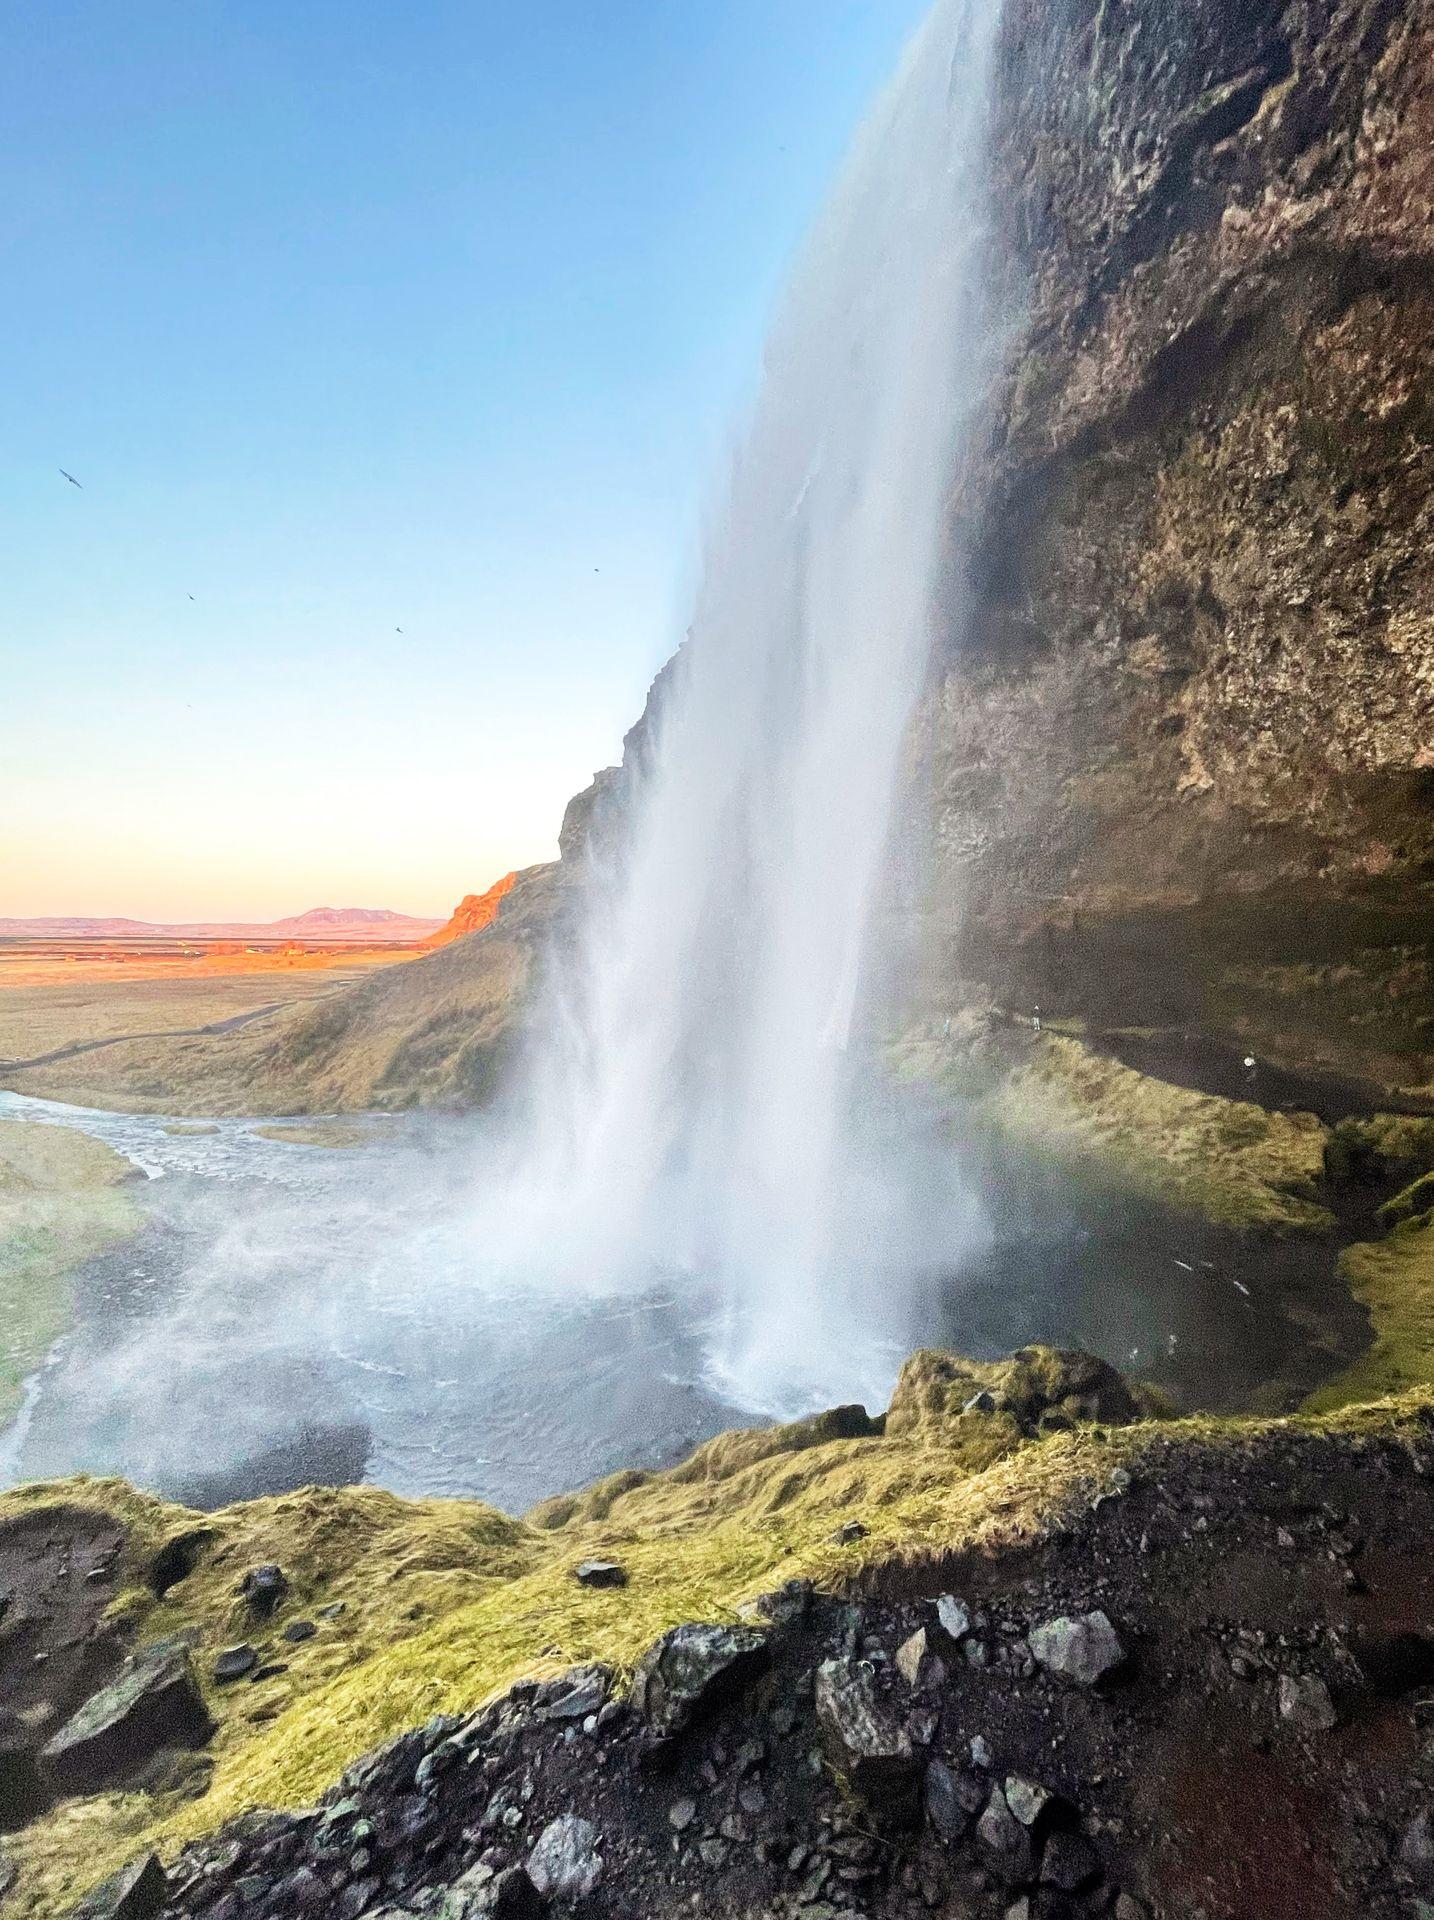 The Seljalandsfoss waterfall in Iceland. It flows down over the walls of a canyon. The sun is setting in the distance.